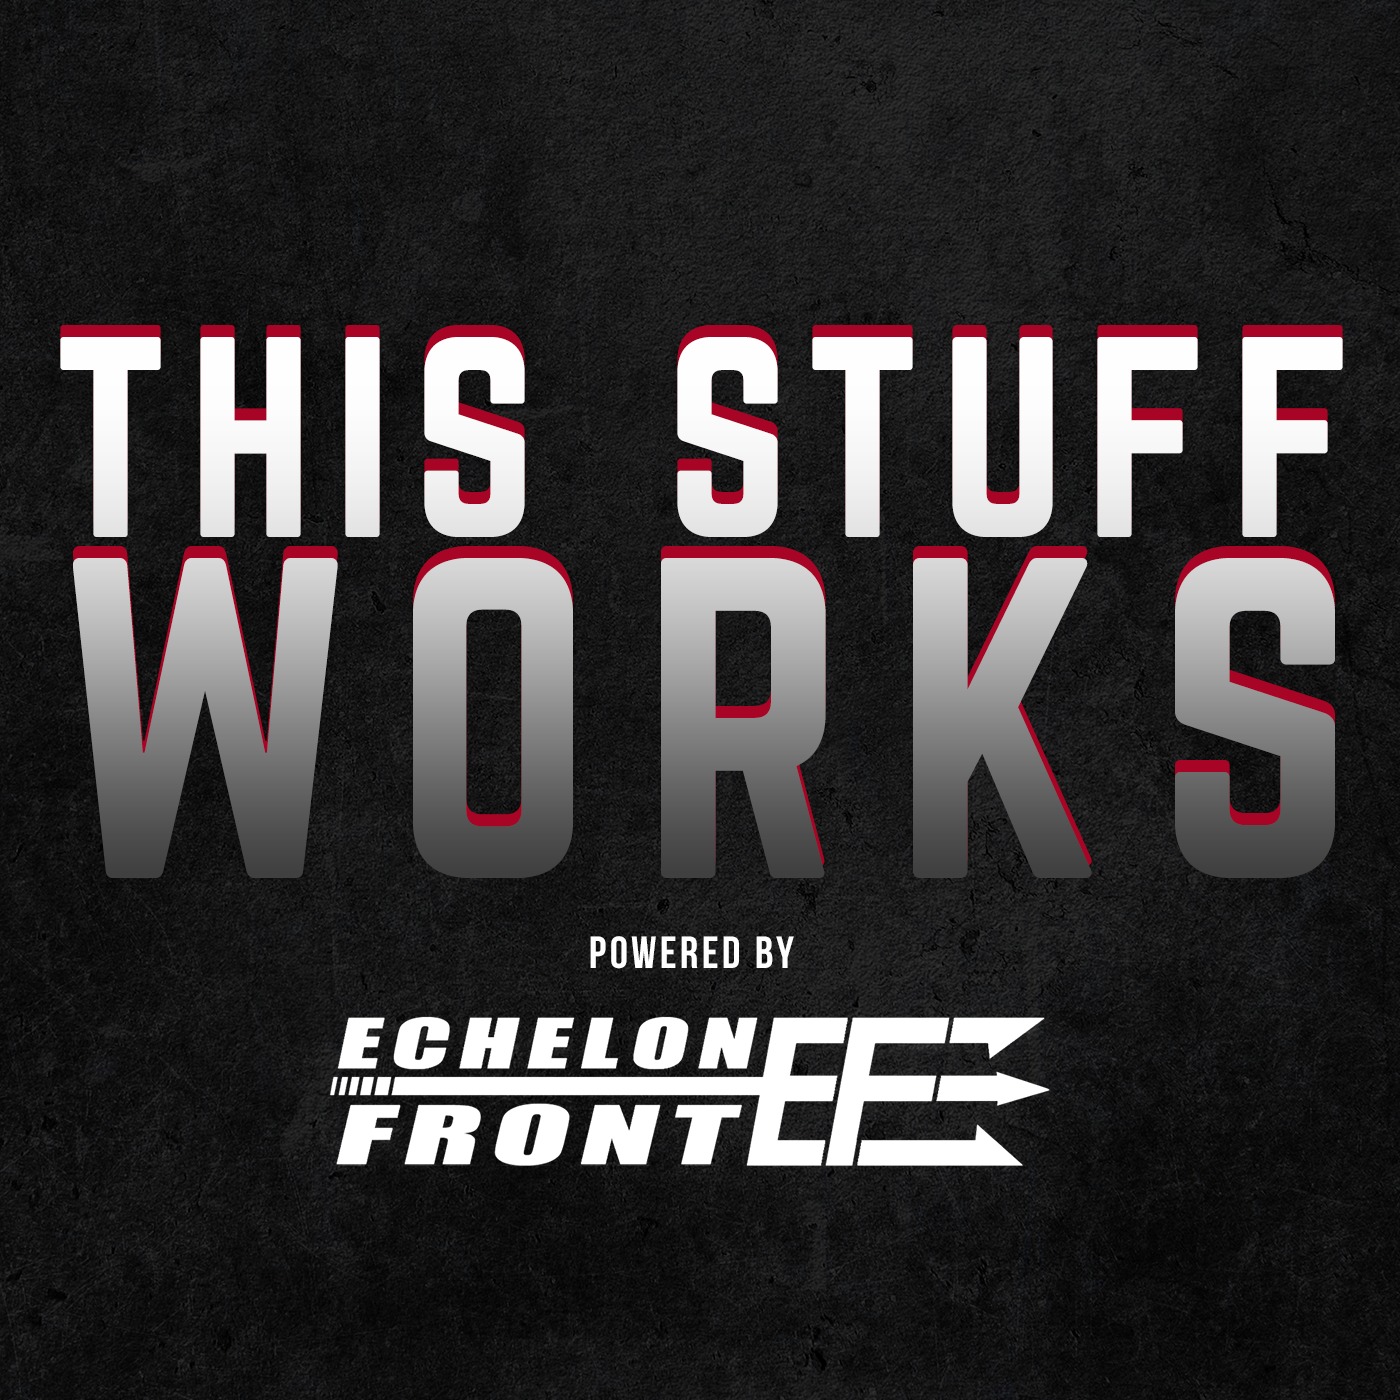 Chief Roger Schei - This Stuff Works Ep. 6